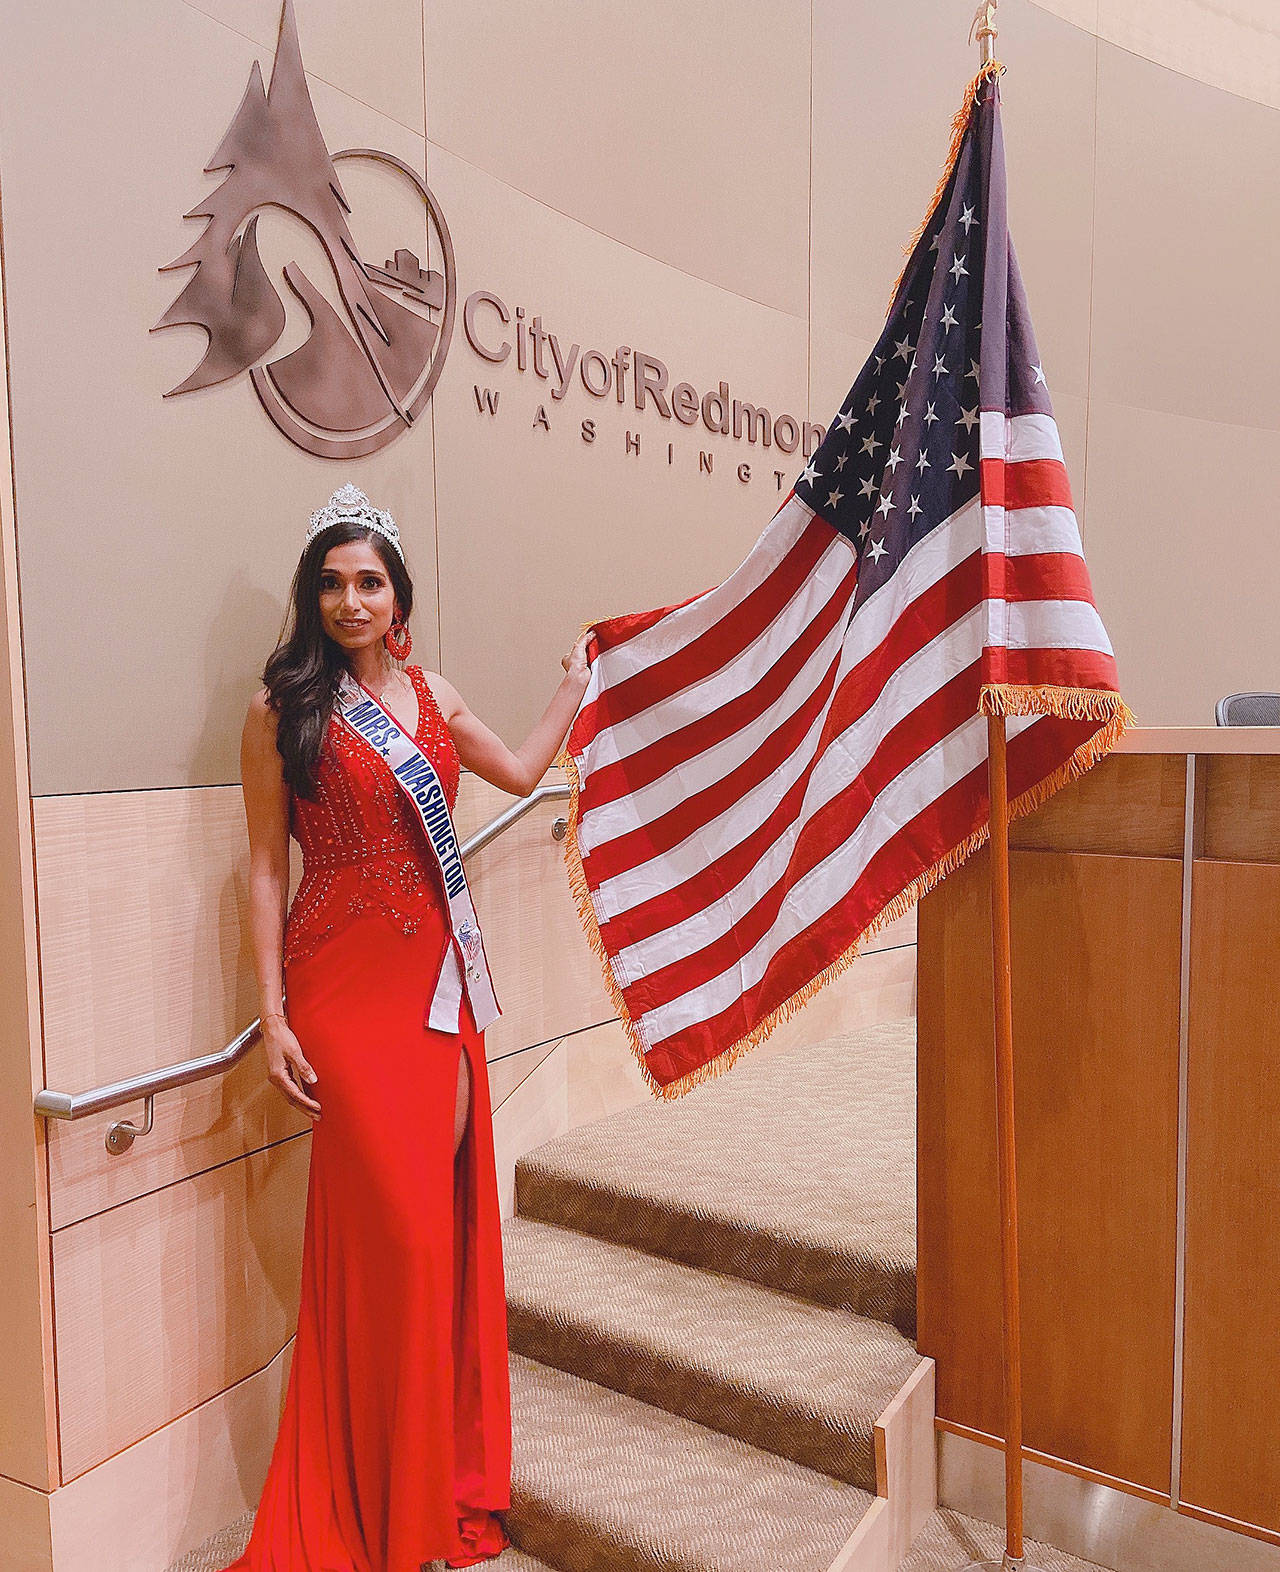 Redmond’s Neelam Chahlia is the first Indian American woman to win the title of Mrs. Washington America. Photo courtesy of Neelam Chahlia